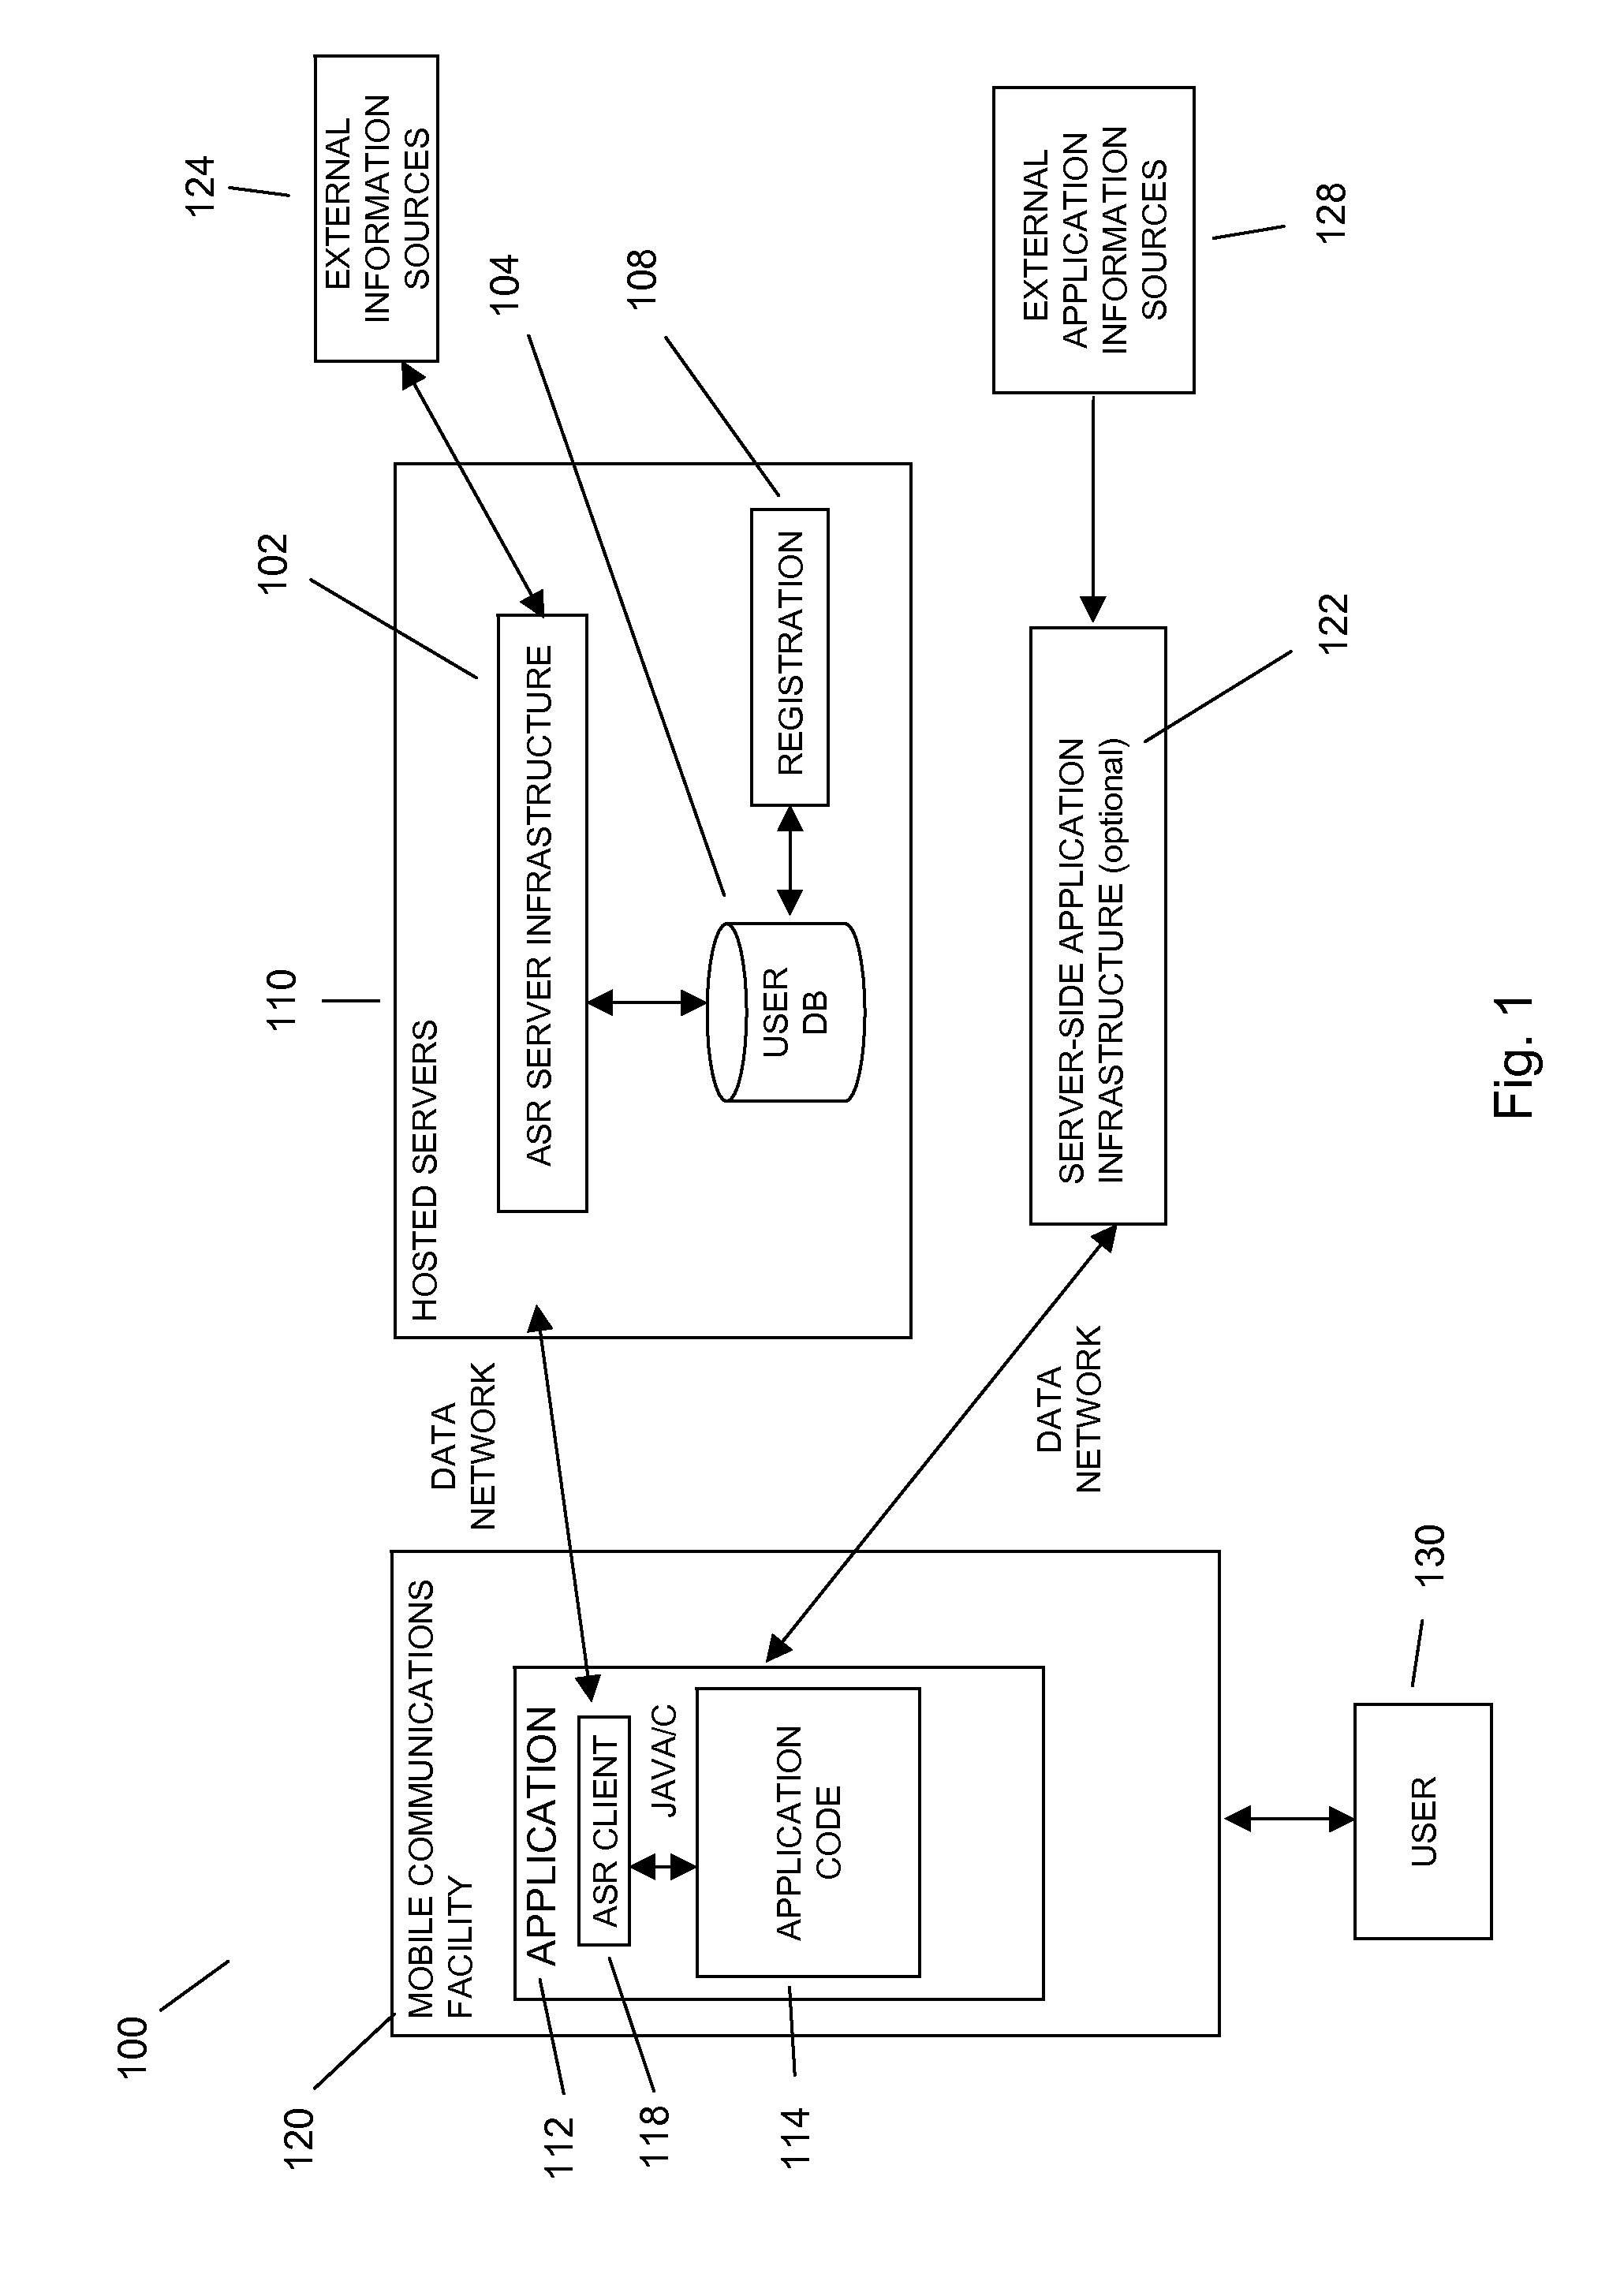 Sending a communications header with voice recording to send metadata for use in speech recognition, formatting, and search in mobile search application